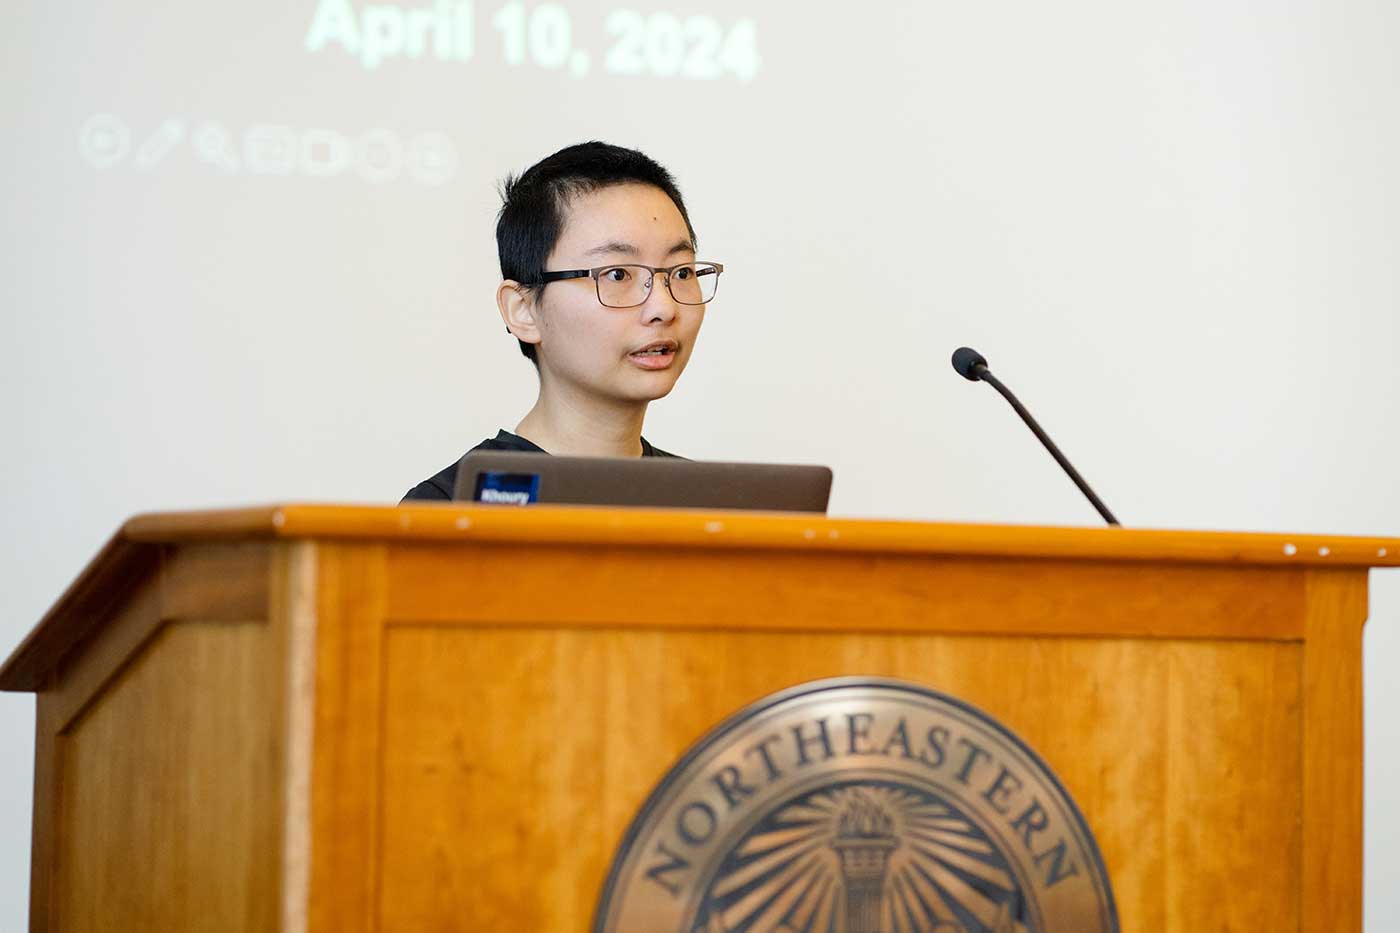 Yuanyuan Yang presents a project while standing behind a podium